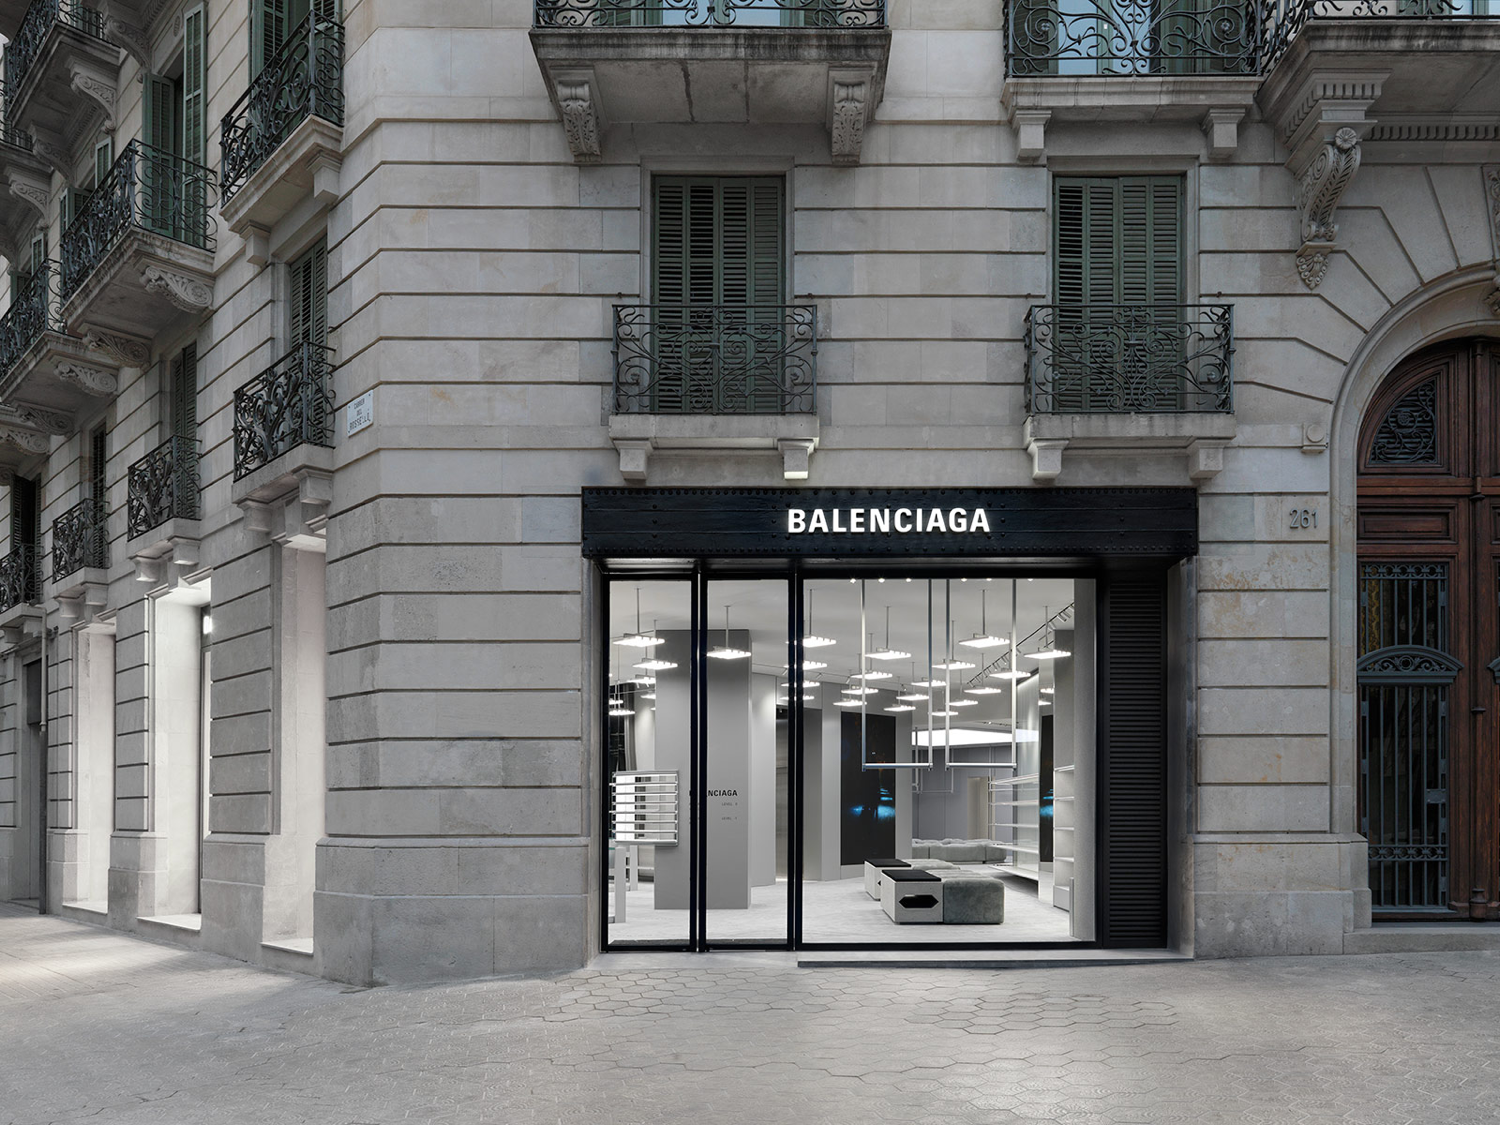 Balenciaga ousts rival Ralph Lauren in Collins St coup